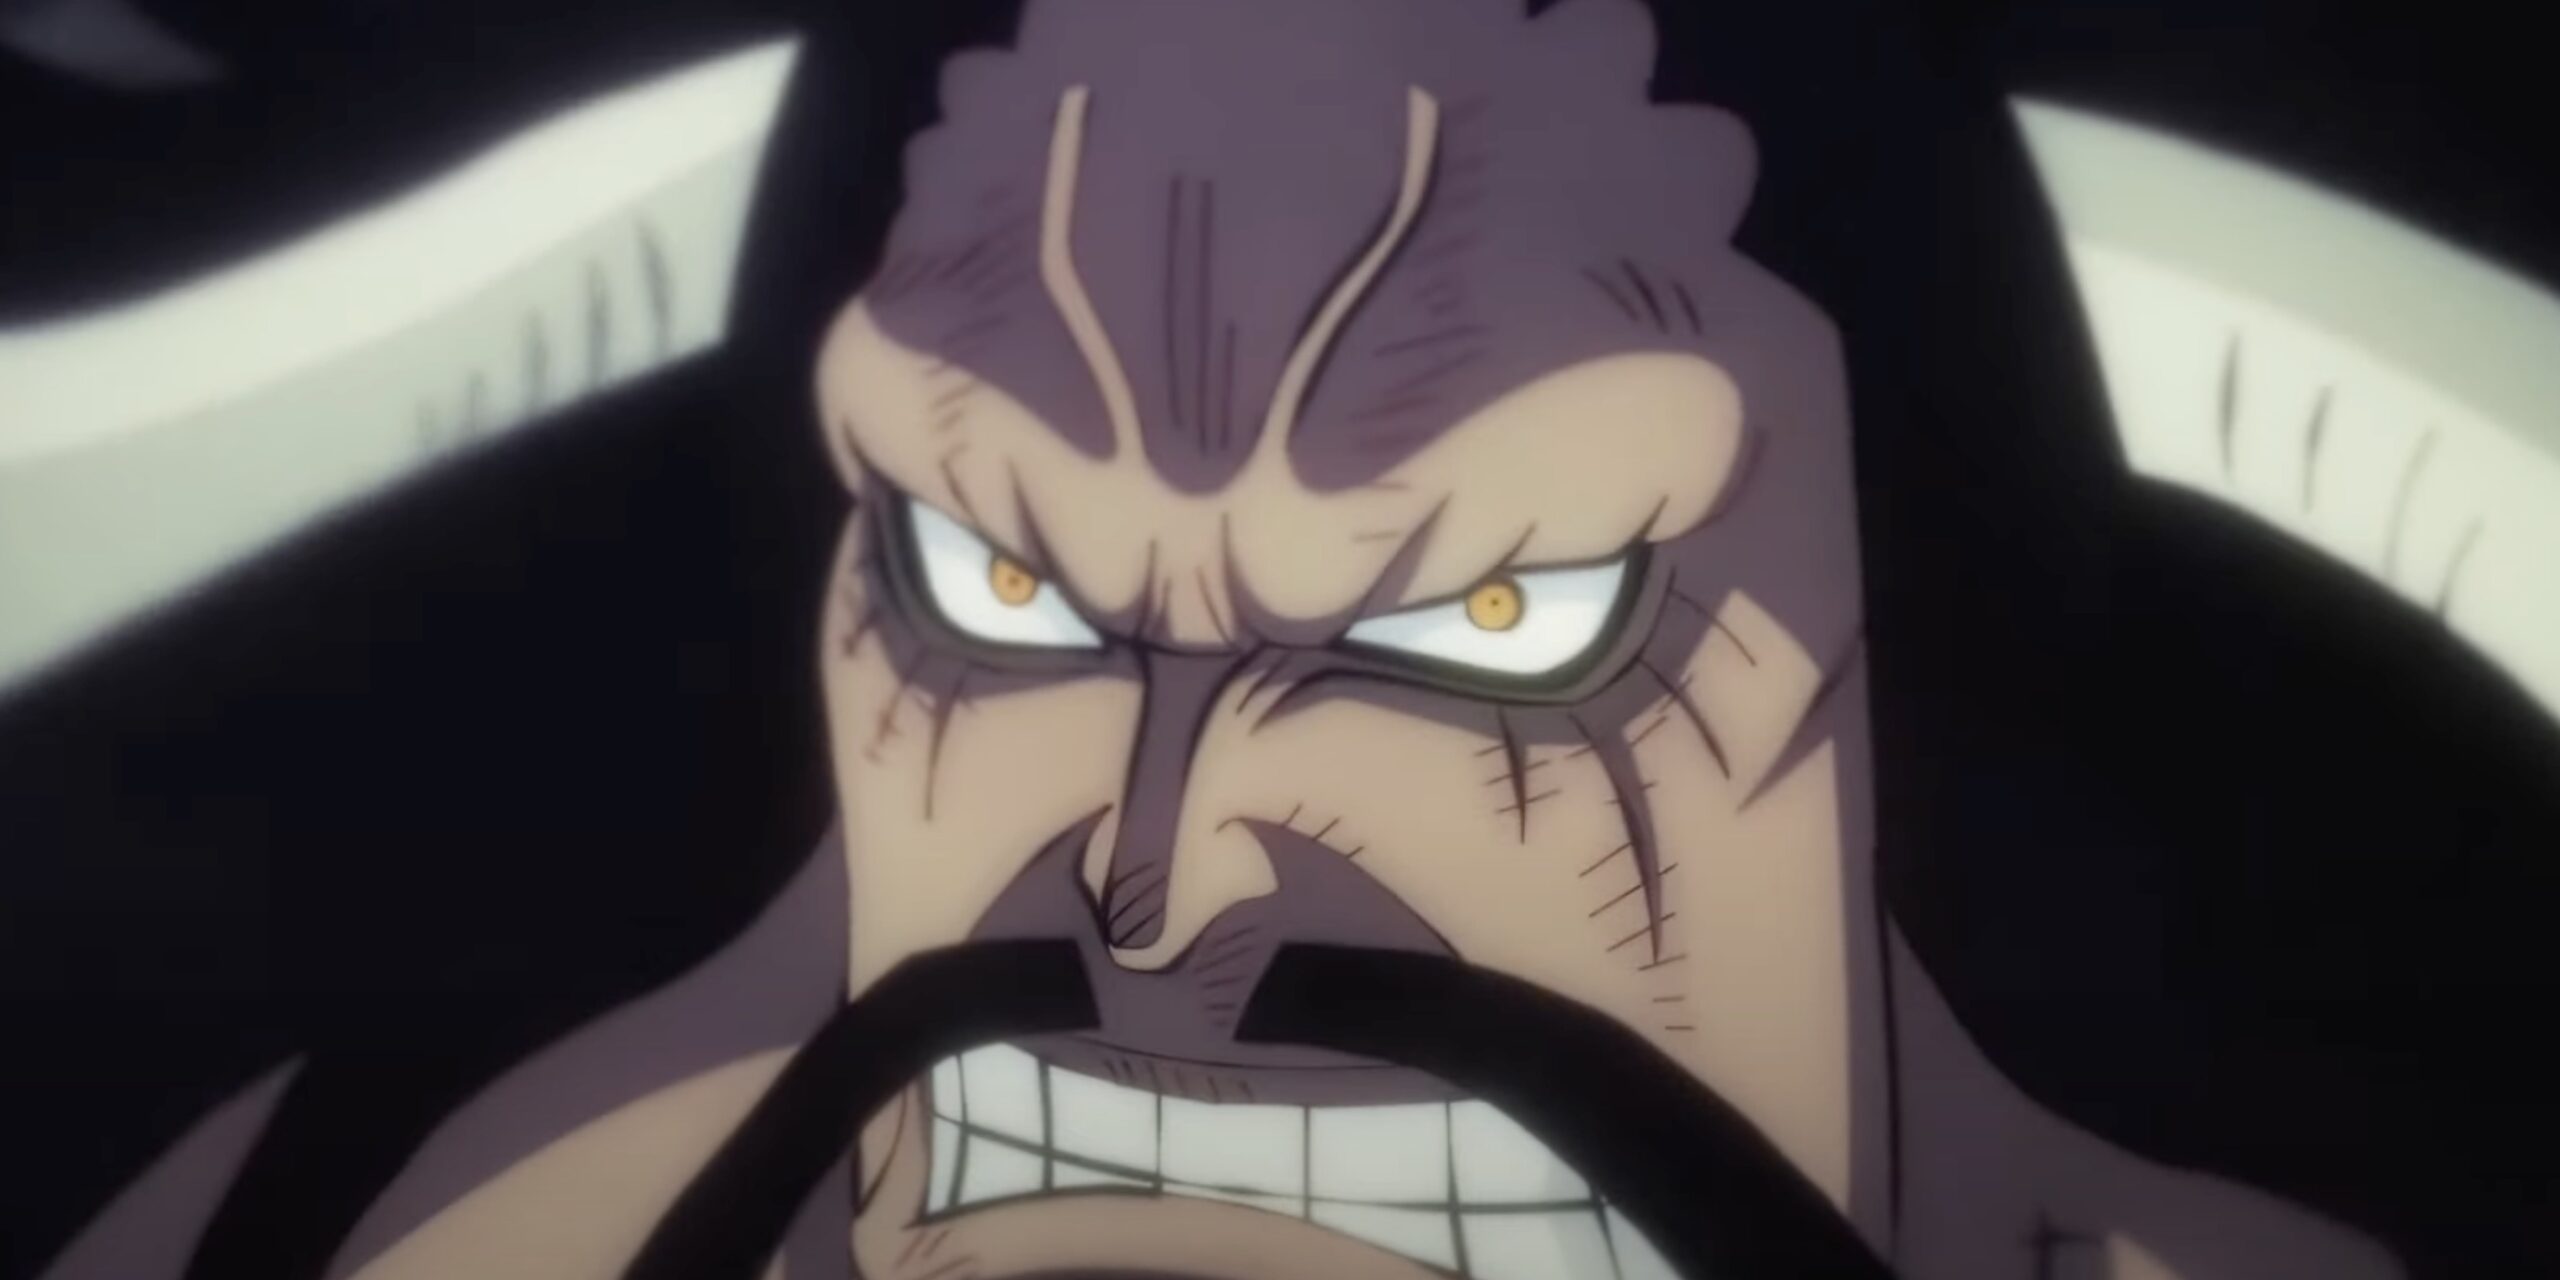 Fans Excitedly Request Clash: Kaido from One Piece vs. Mahoraga from Jujutsu Kaisen